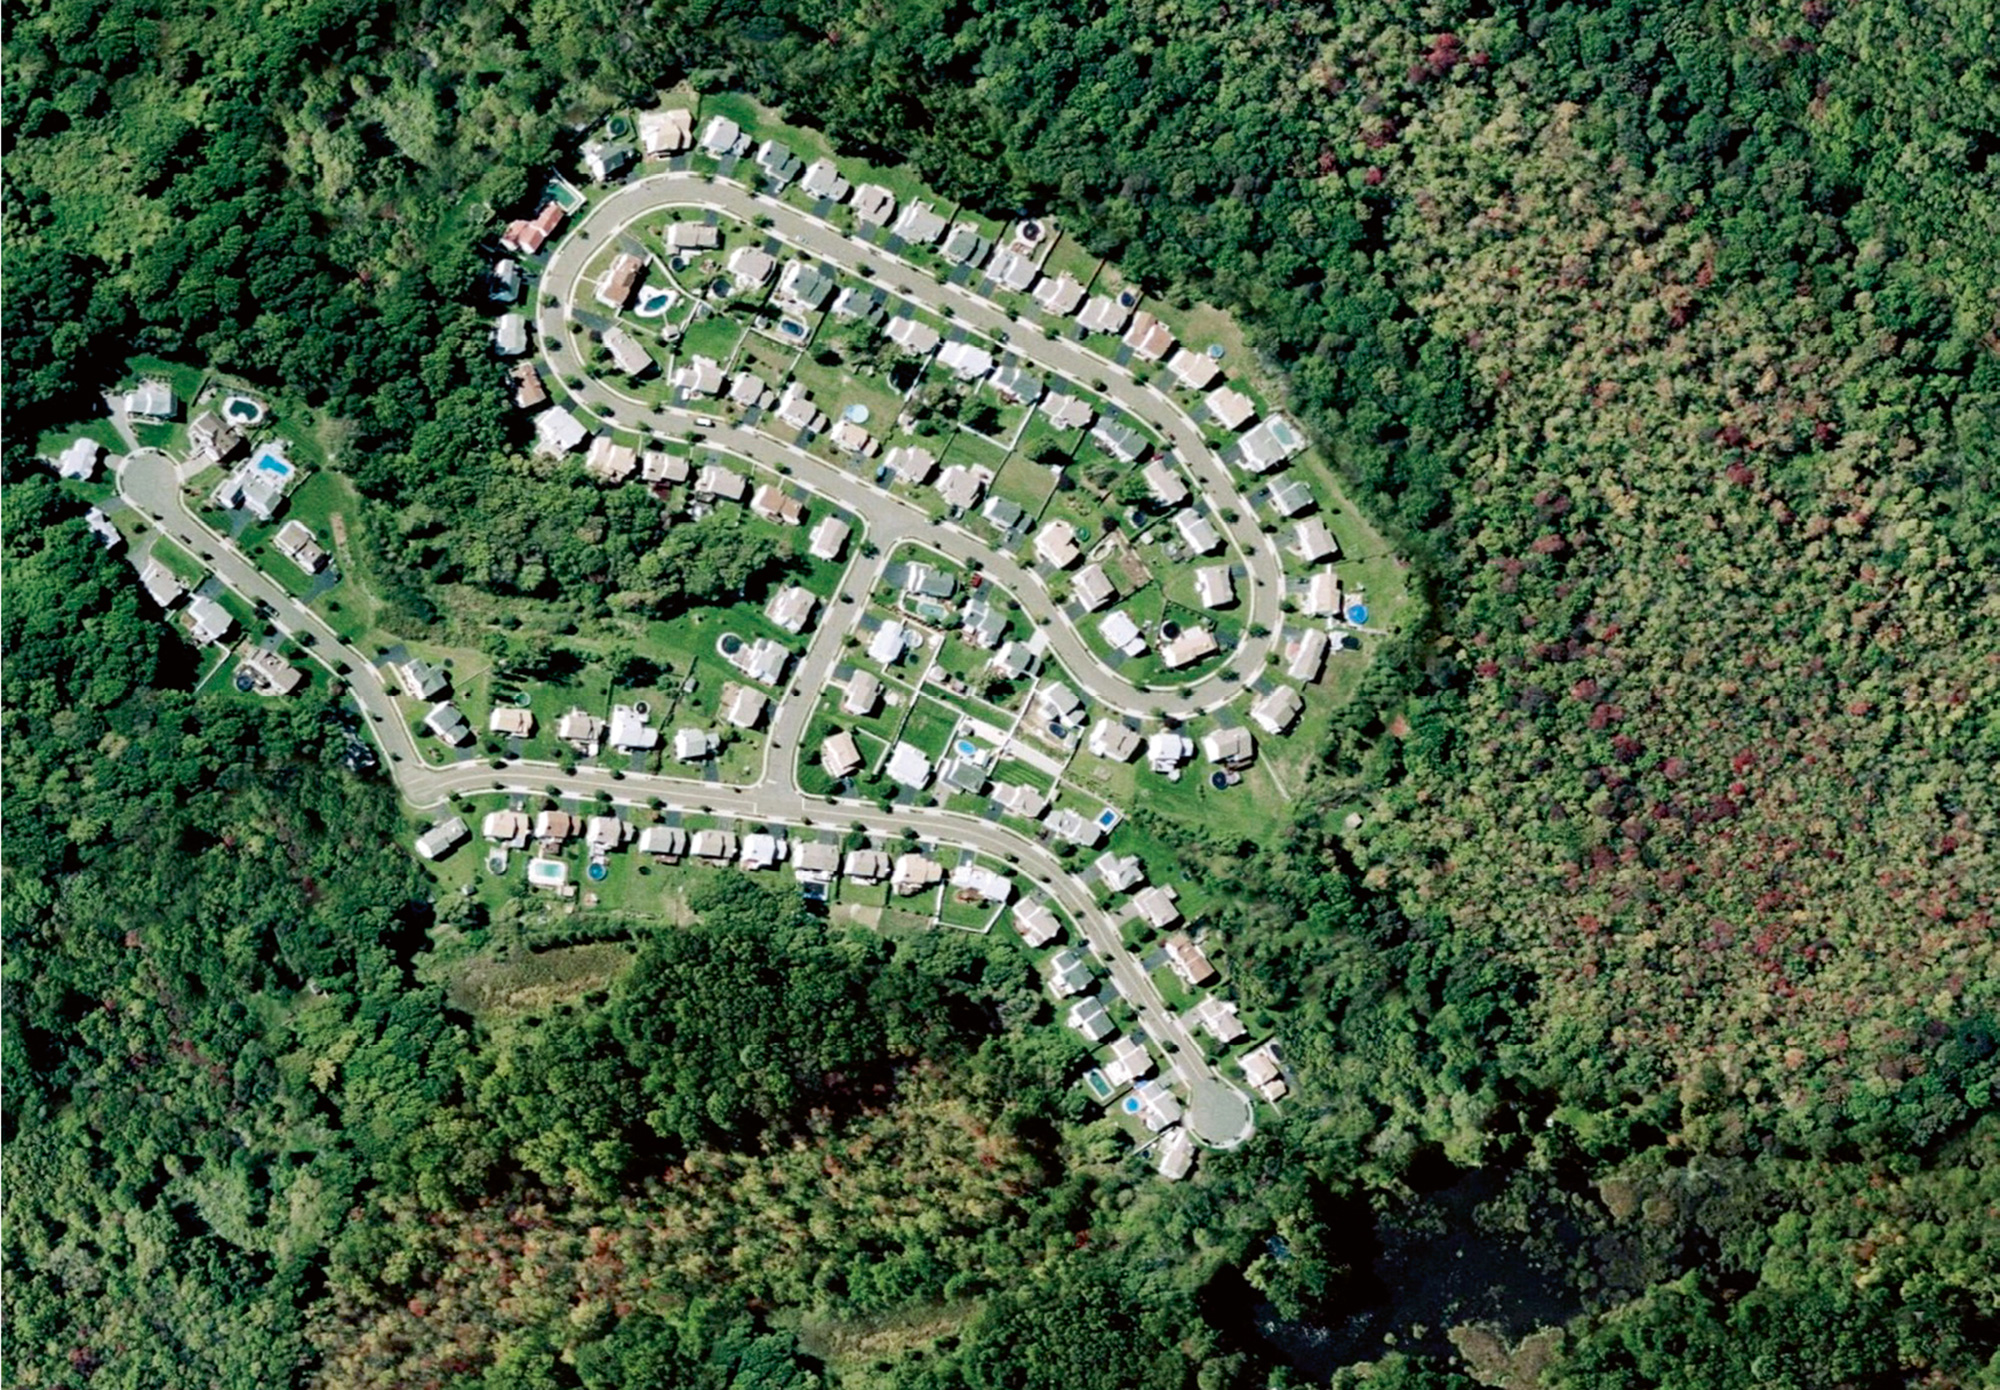 An altered aerial photograph by Jeremy Drummond of a planned housing community in Connecticut.